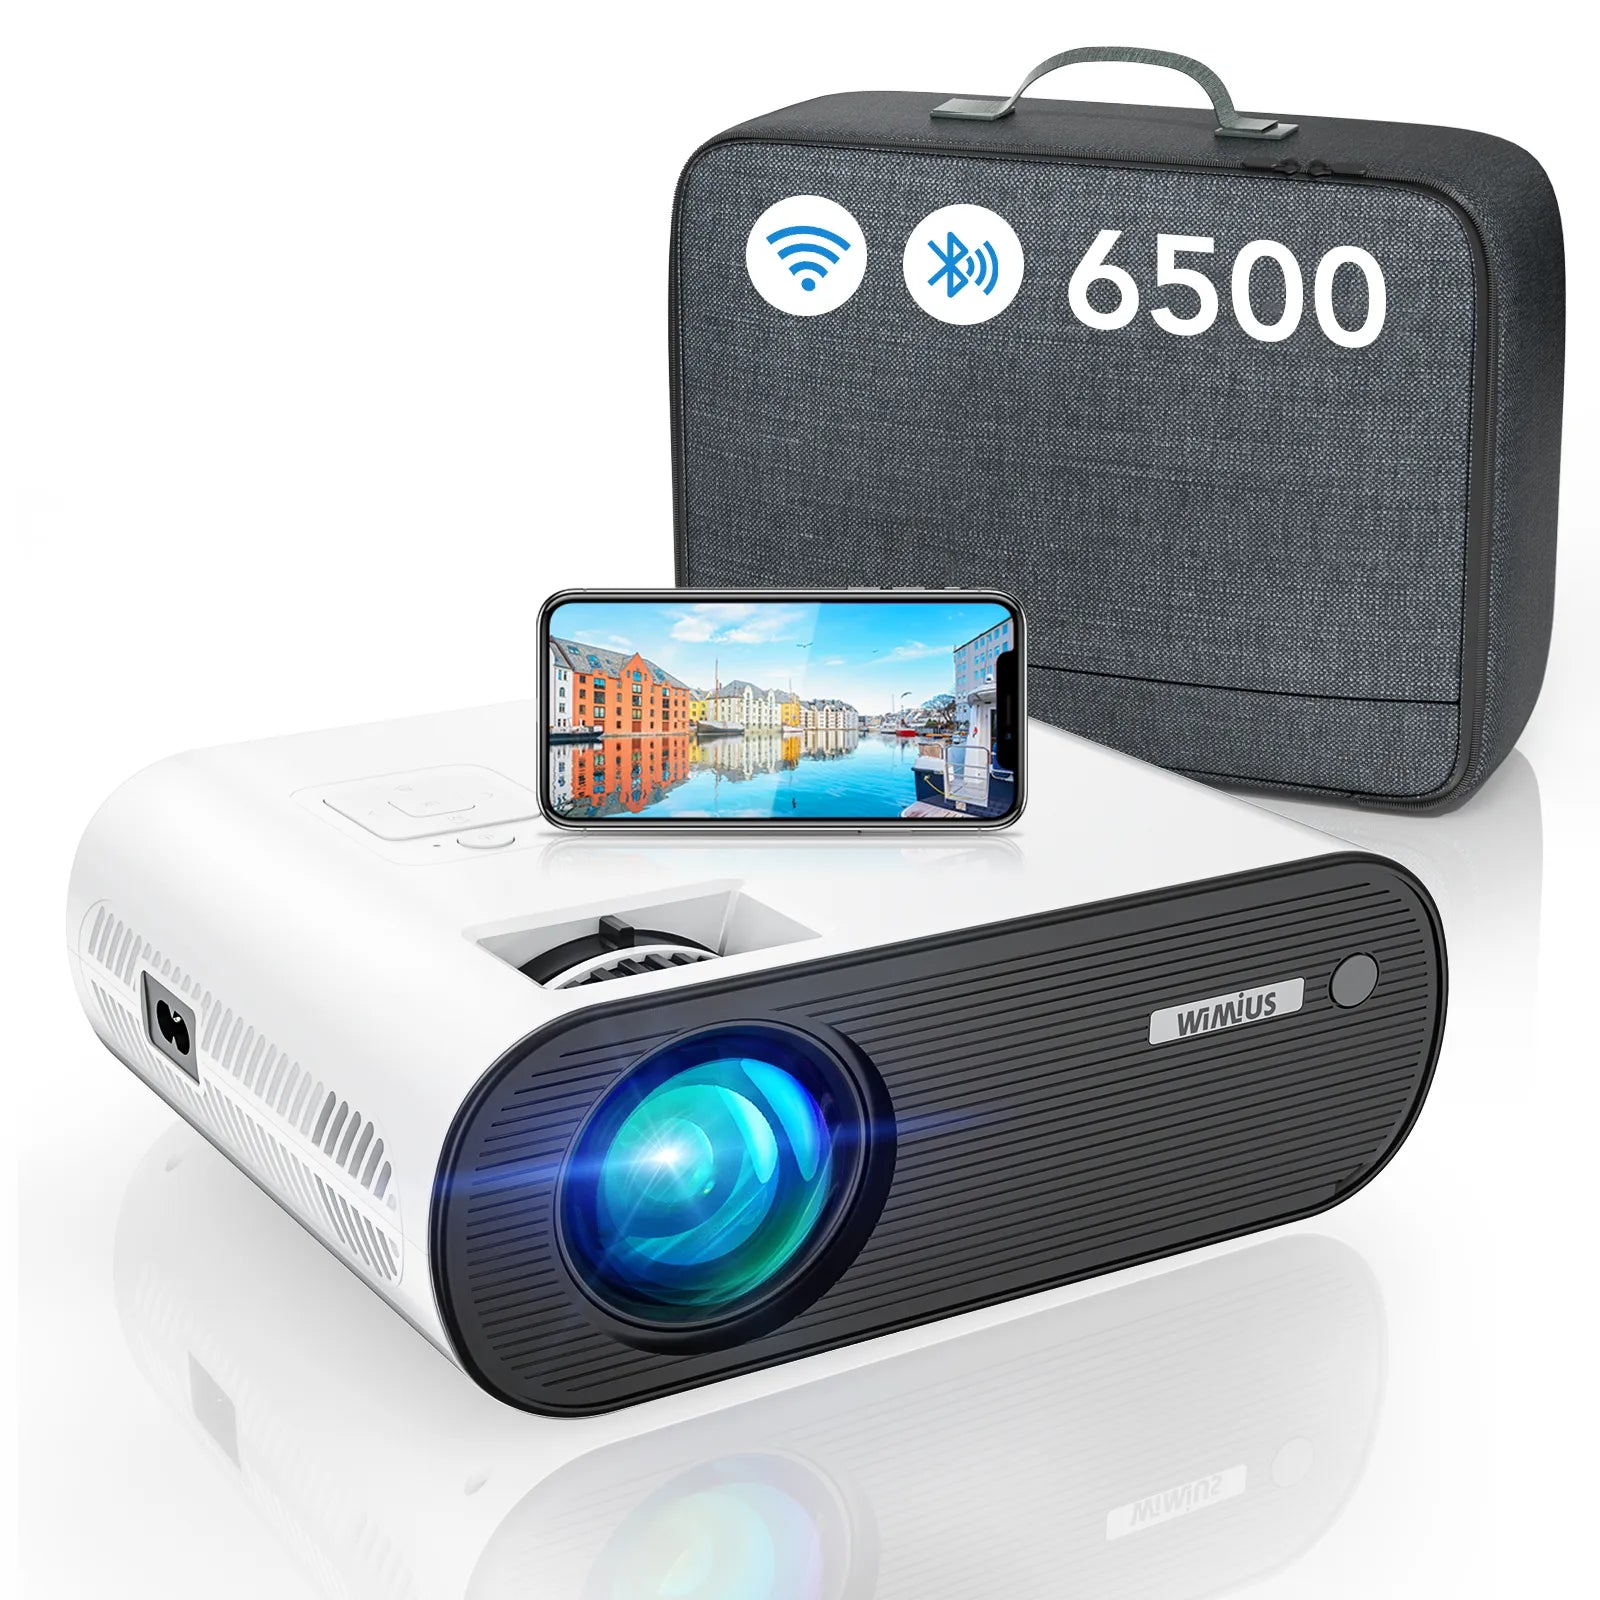 K5 Projectors: Mini Portable Projector with WiFi and Bluetooth, 4K Full HD Video Projection, 1080P Beamer Mirroring for Home Theater